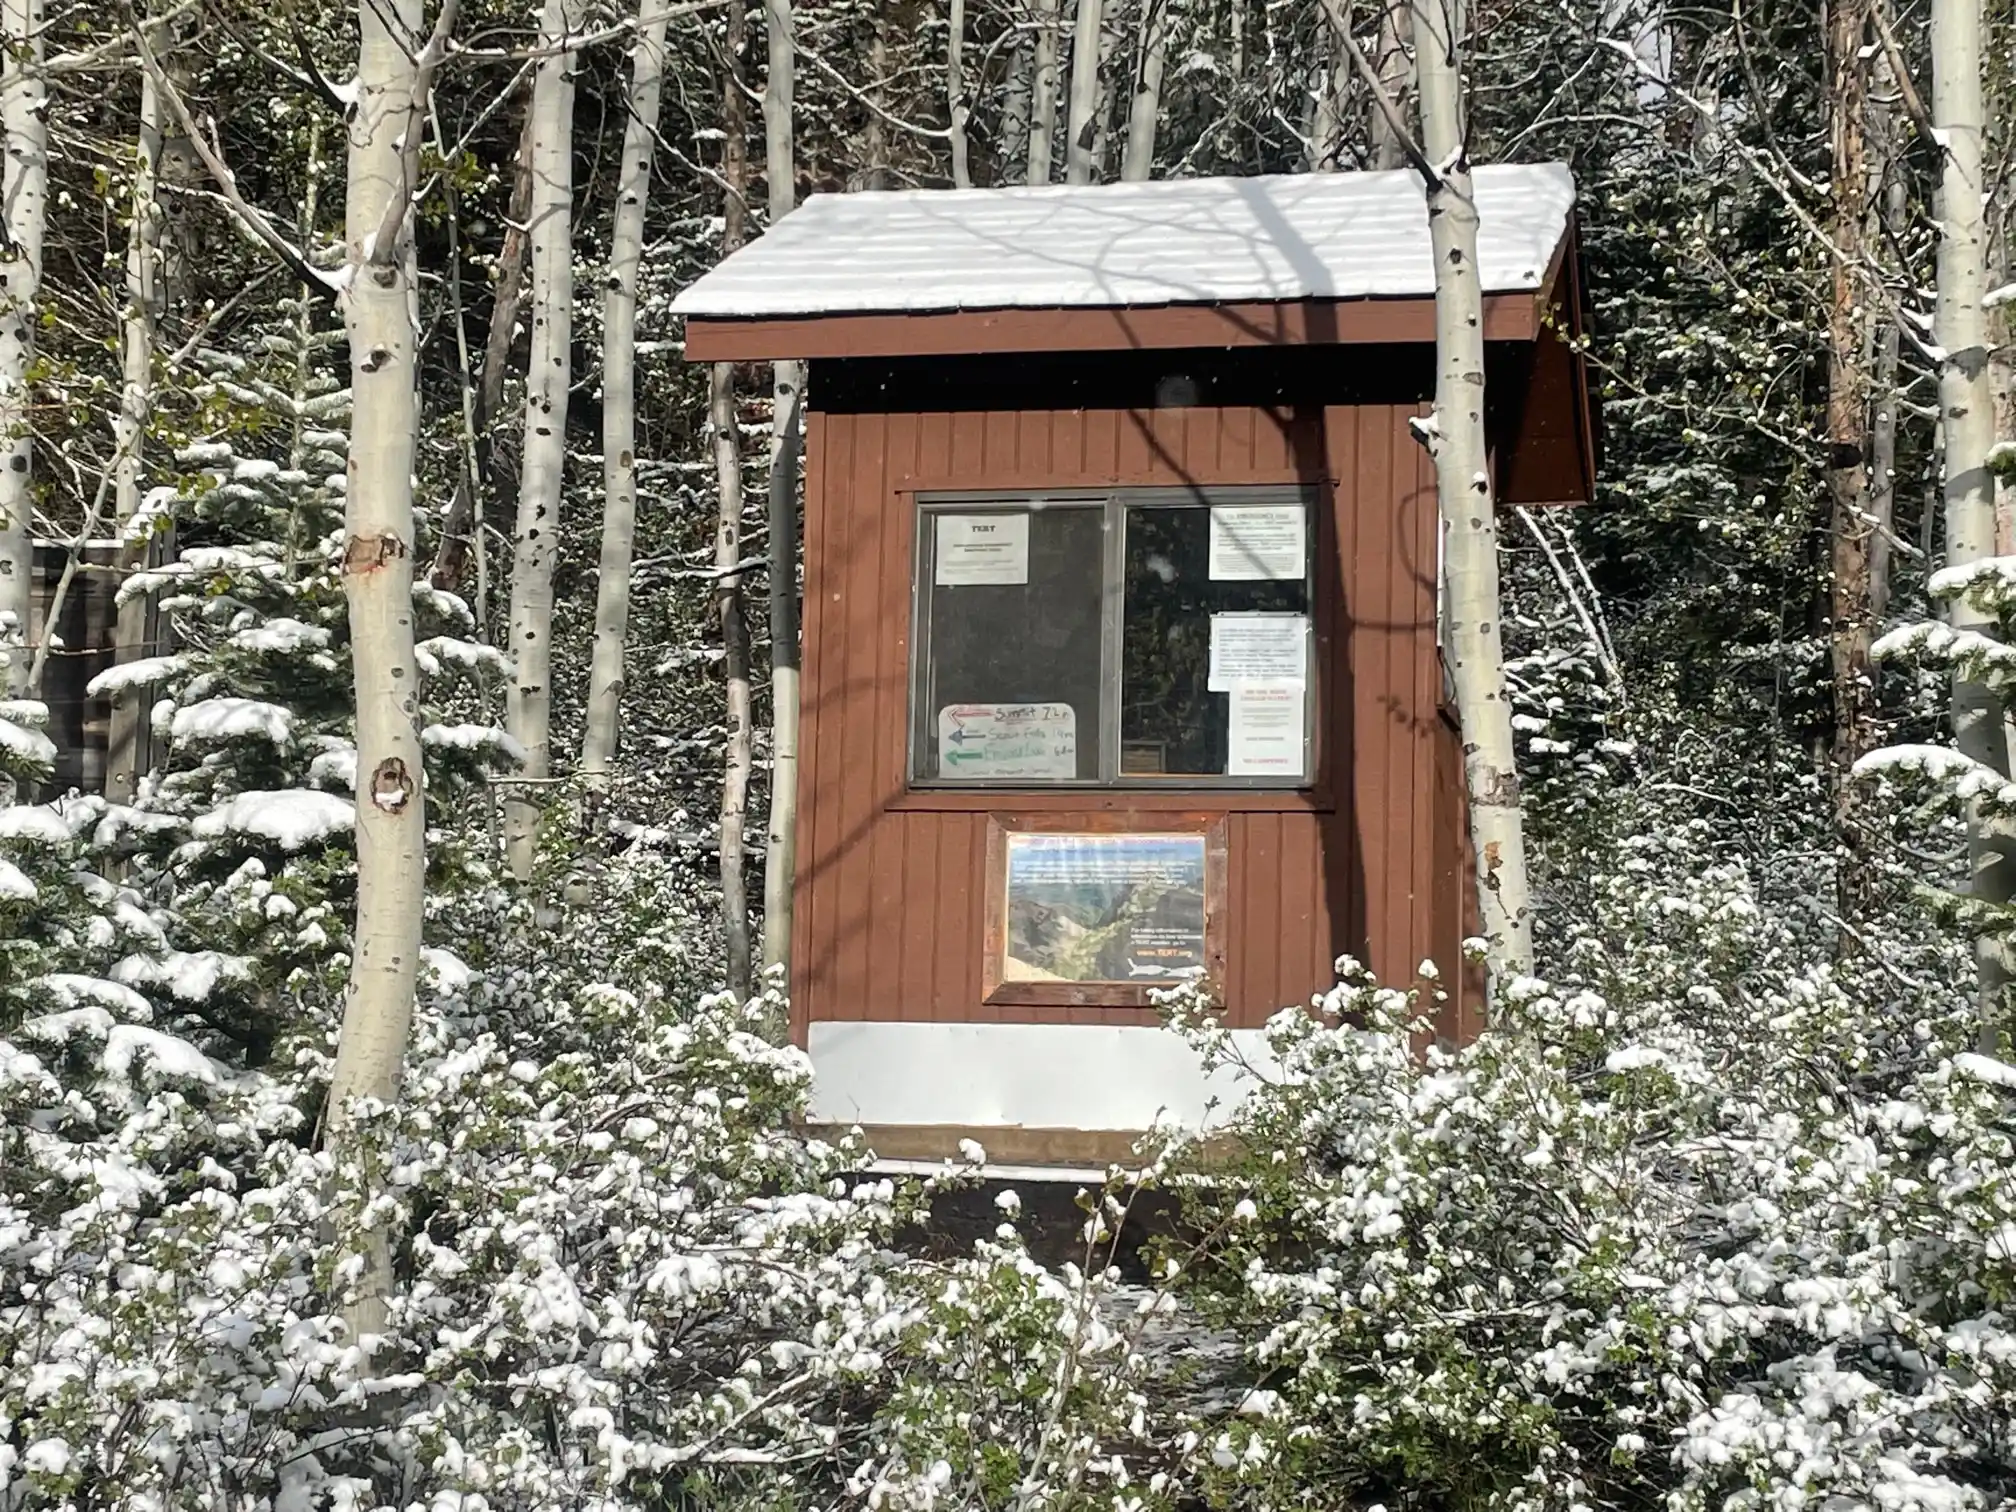 The brown TERT shack is shown in the forest with a light dusting of snow